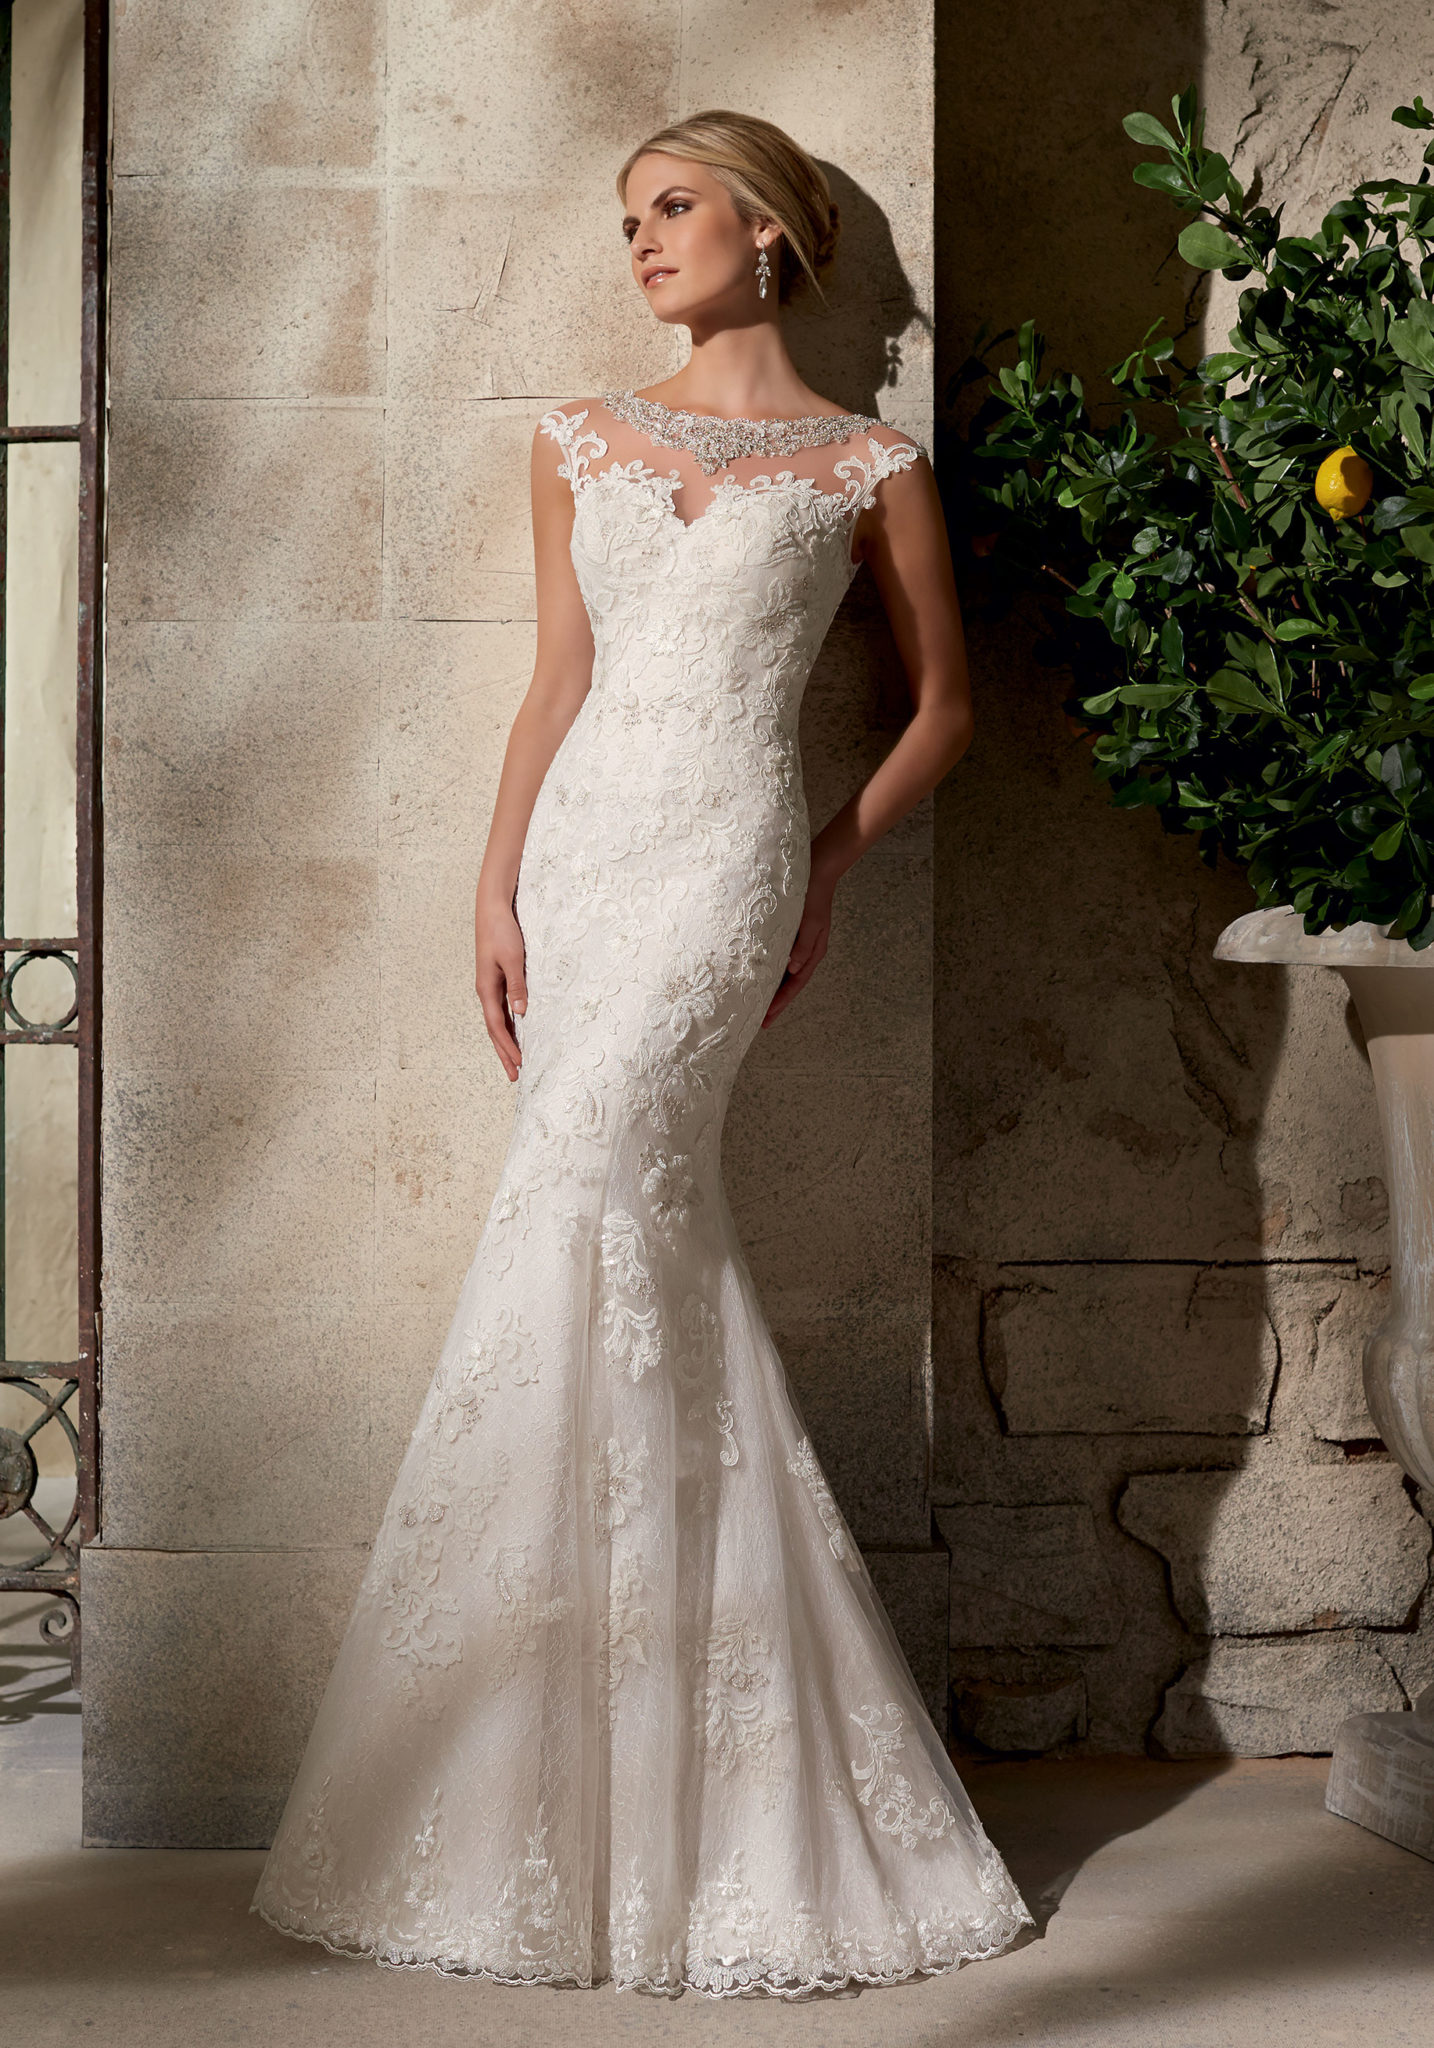 Top Wedding Dress Consignment Houston of the decade Learn more here 